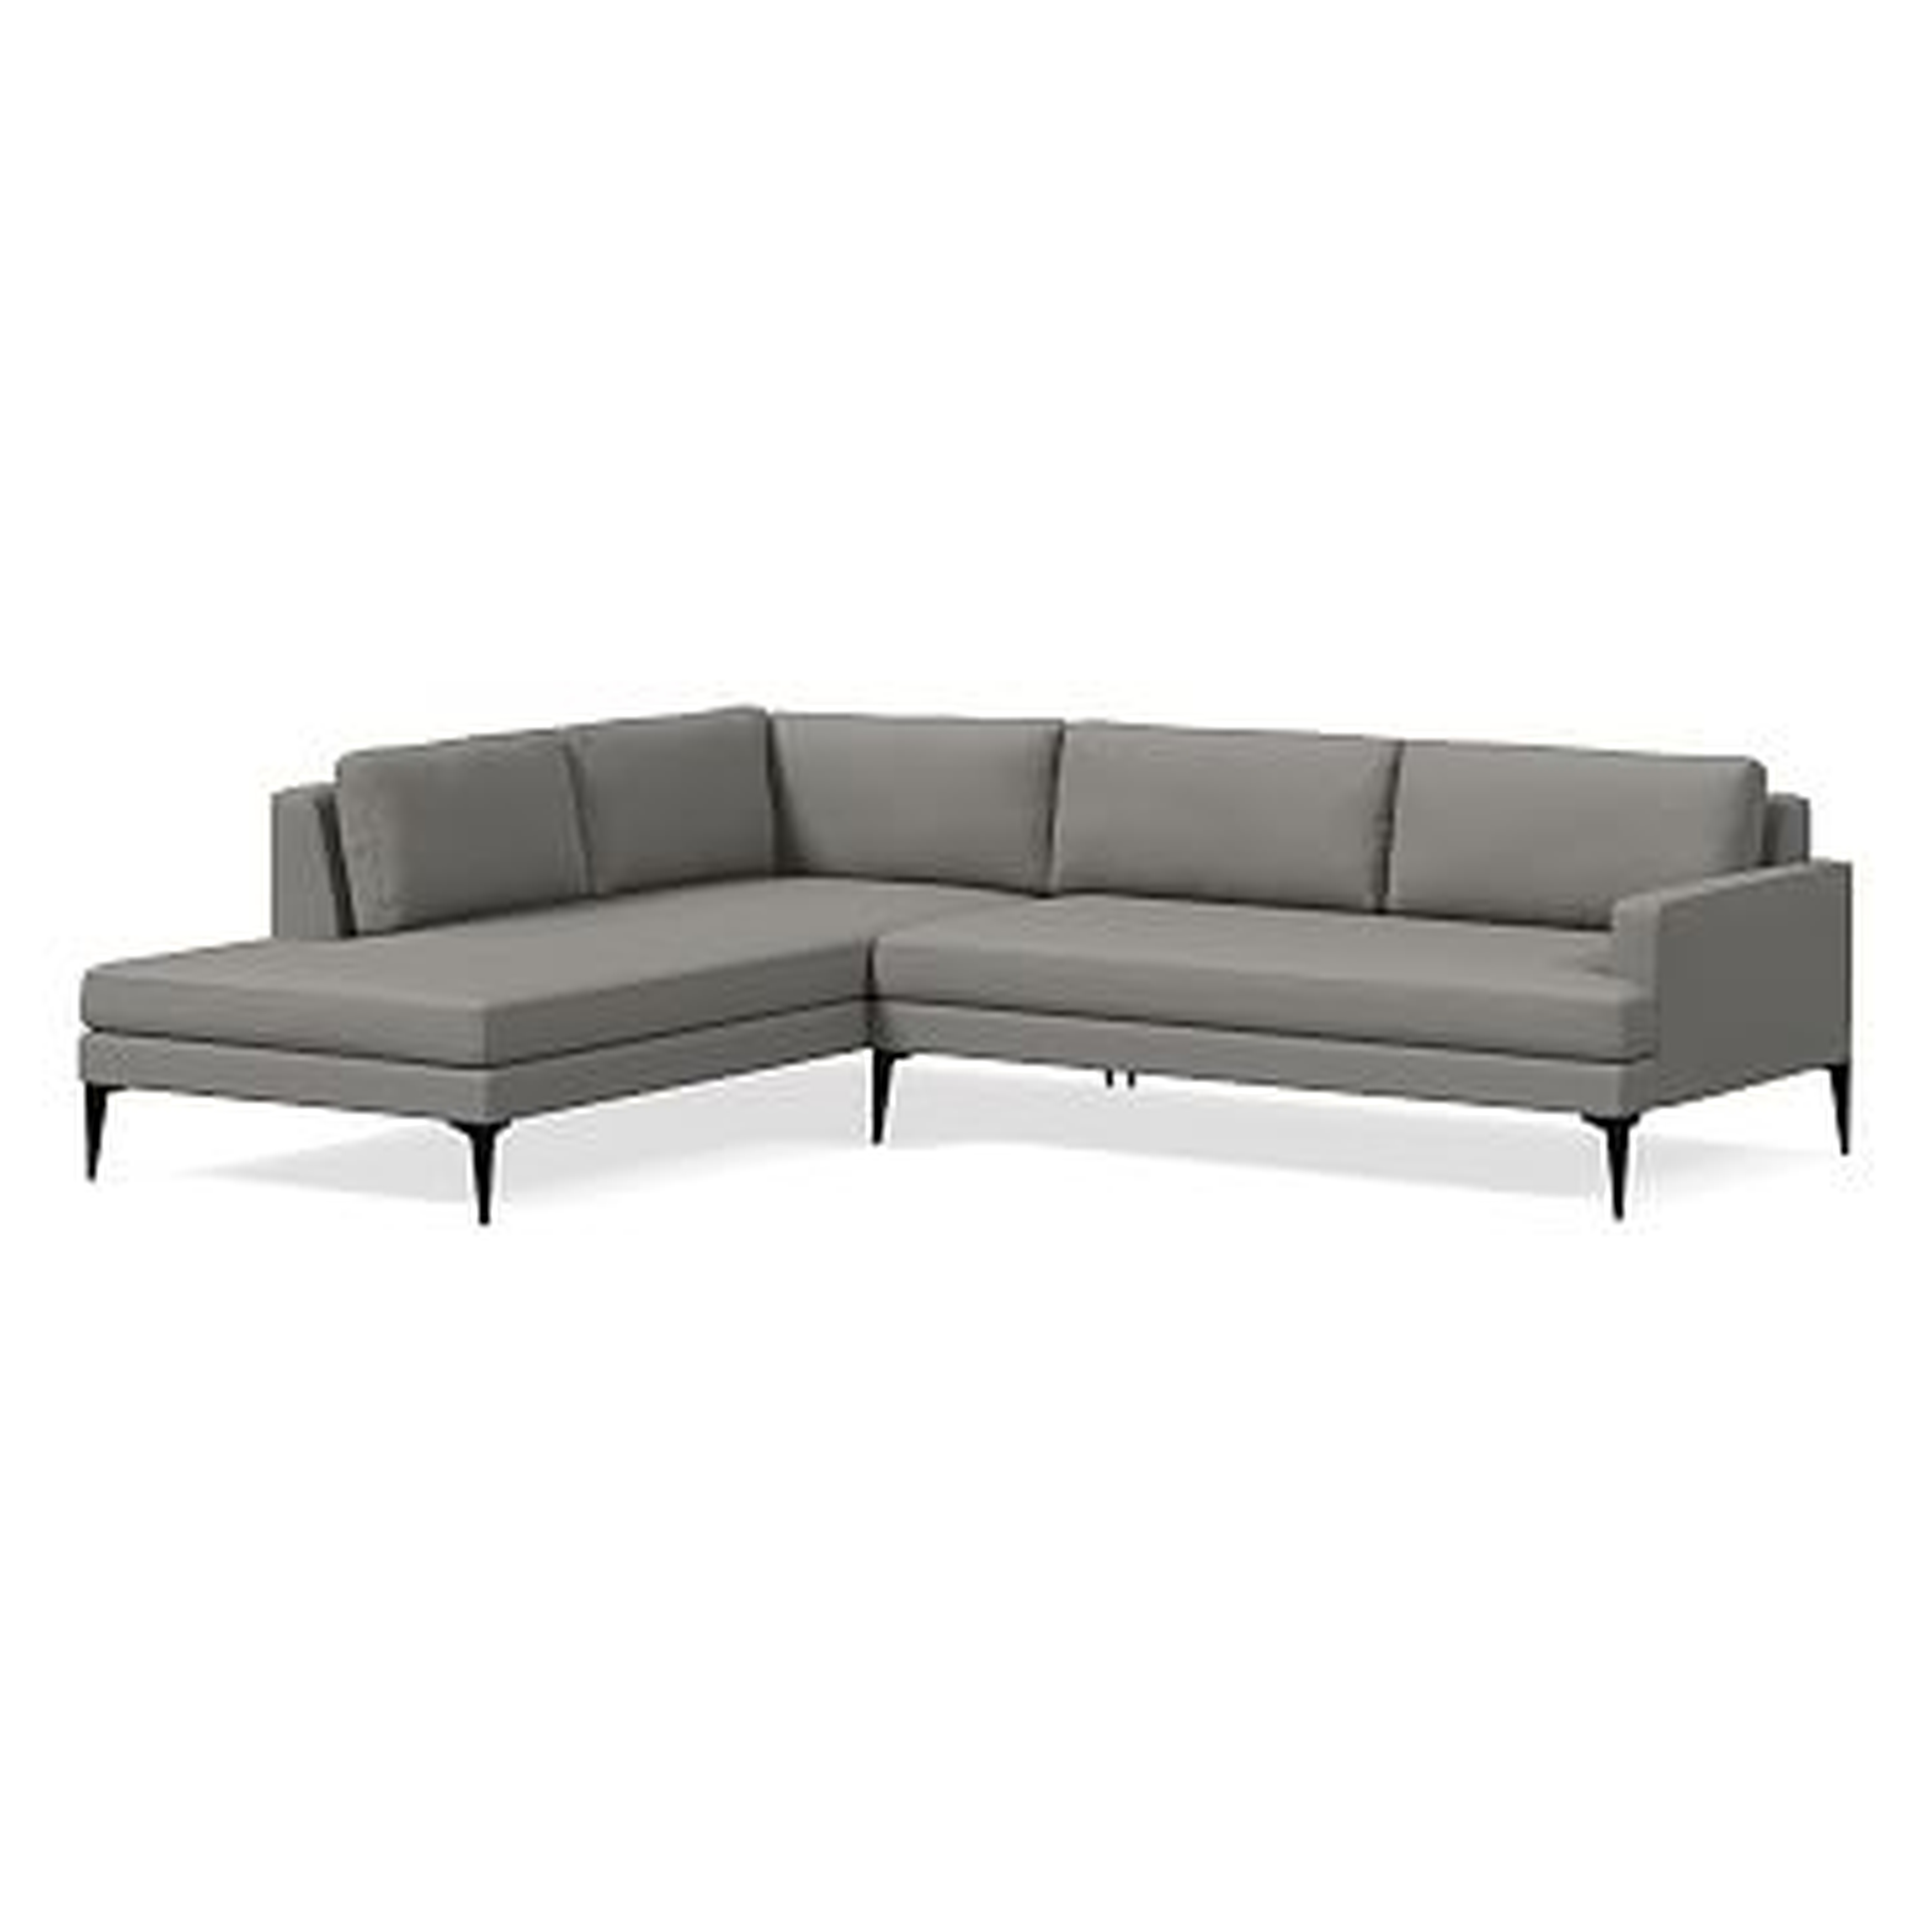 Andes Sectional Set 14: Right Arm 2.5 Seater Sofa, Left Arm Terminal Chaise, Poly , Chenille Tweed, Silver, Dark Pewter - West Elm